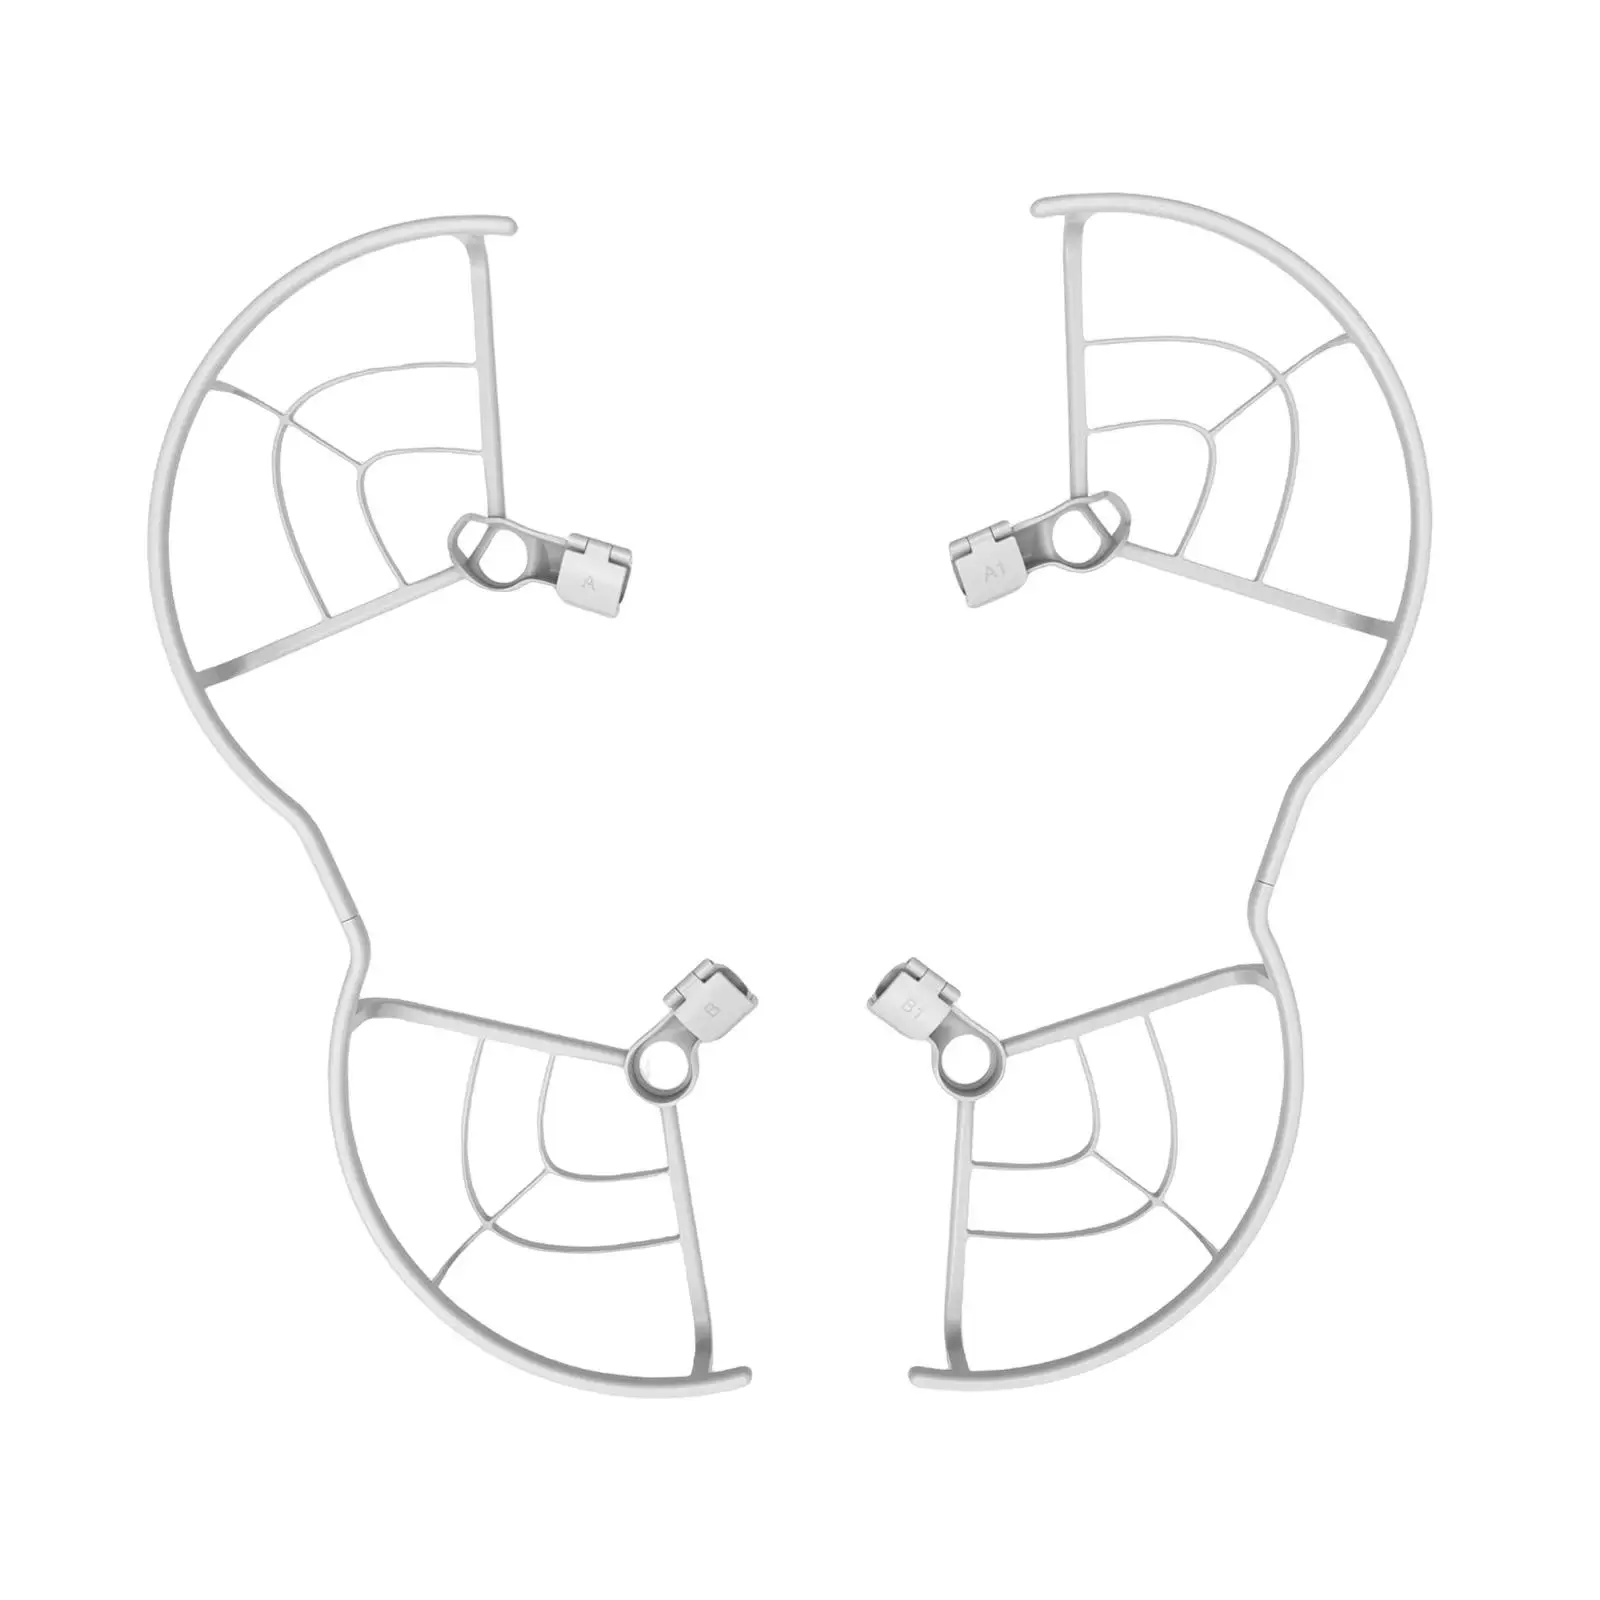 2 Pieces Propeller Protector fortress Crash Guard Drone Propeller Guards Quick Release Removable for Mini 3 Accs